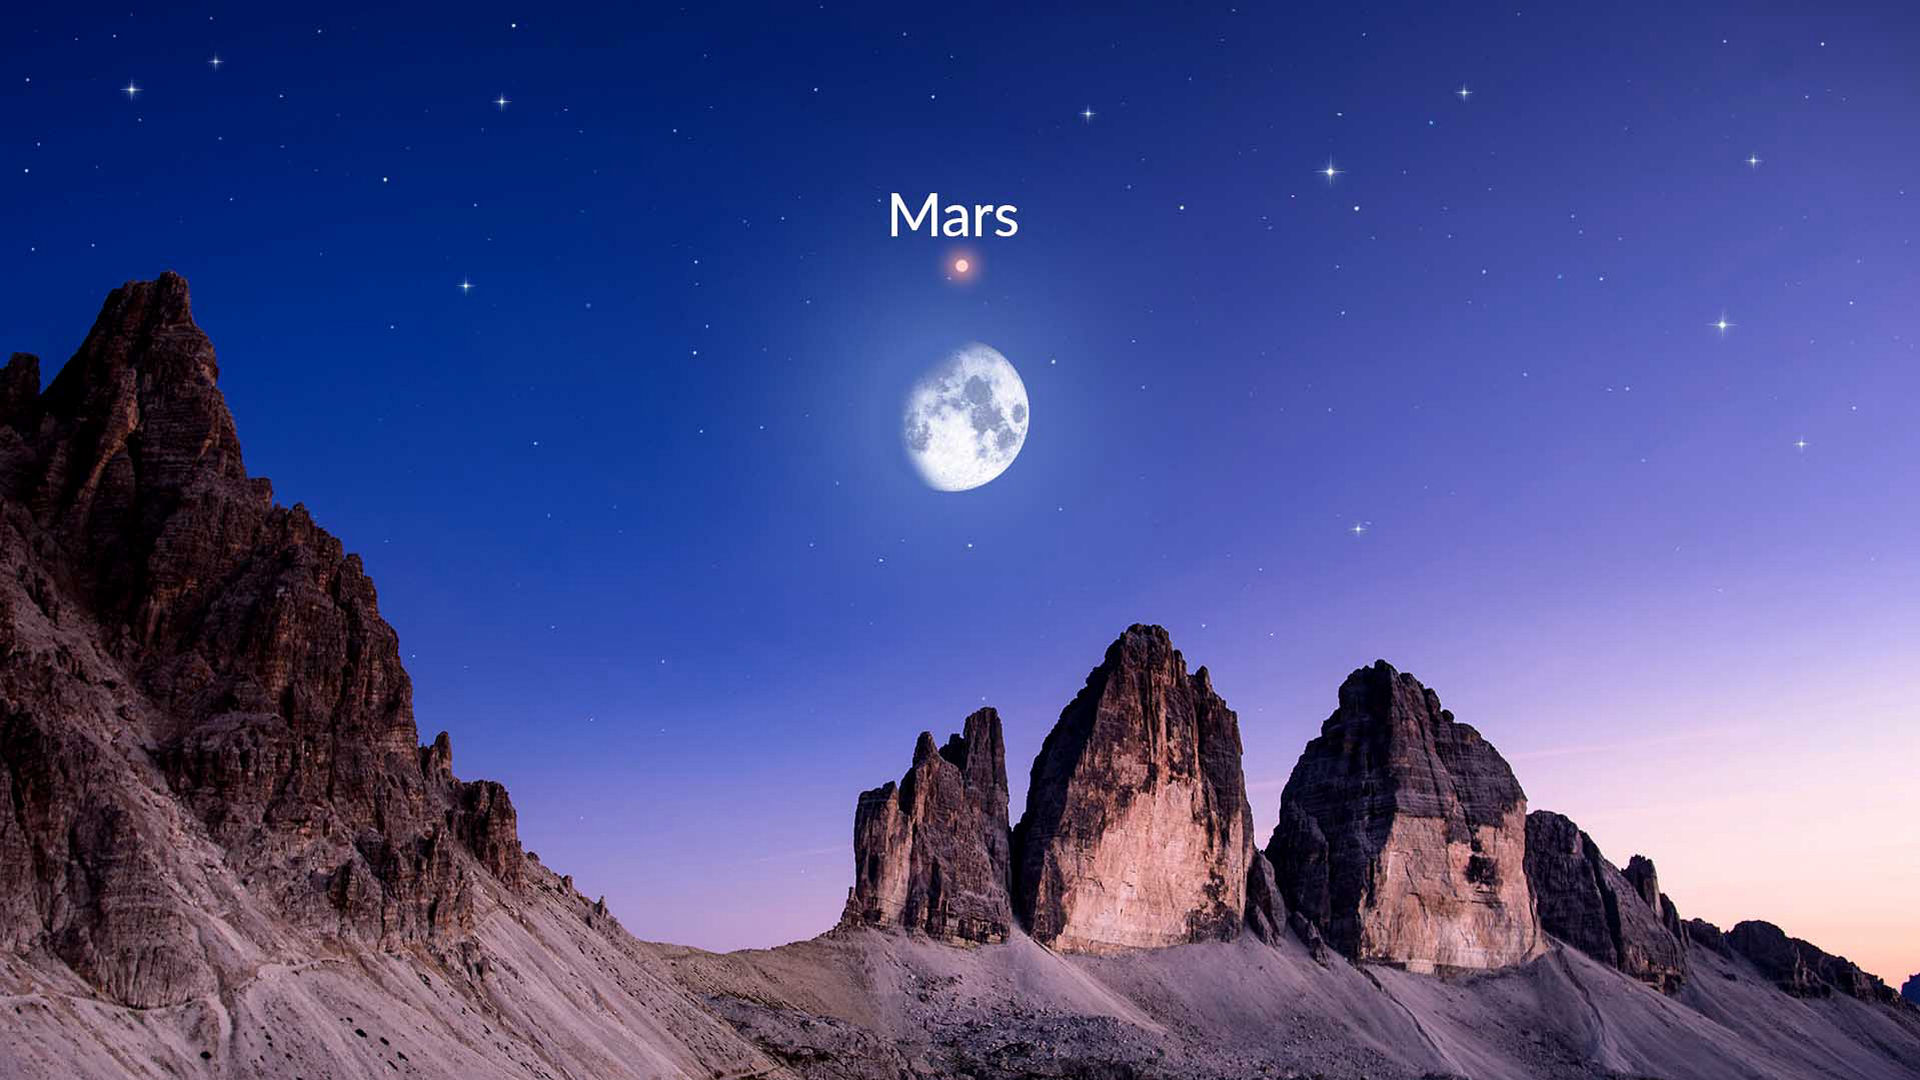 Moon and Mars Dance Together in the Night Sky